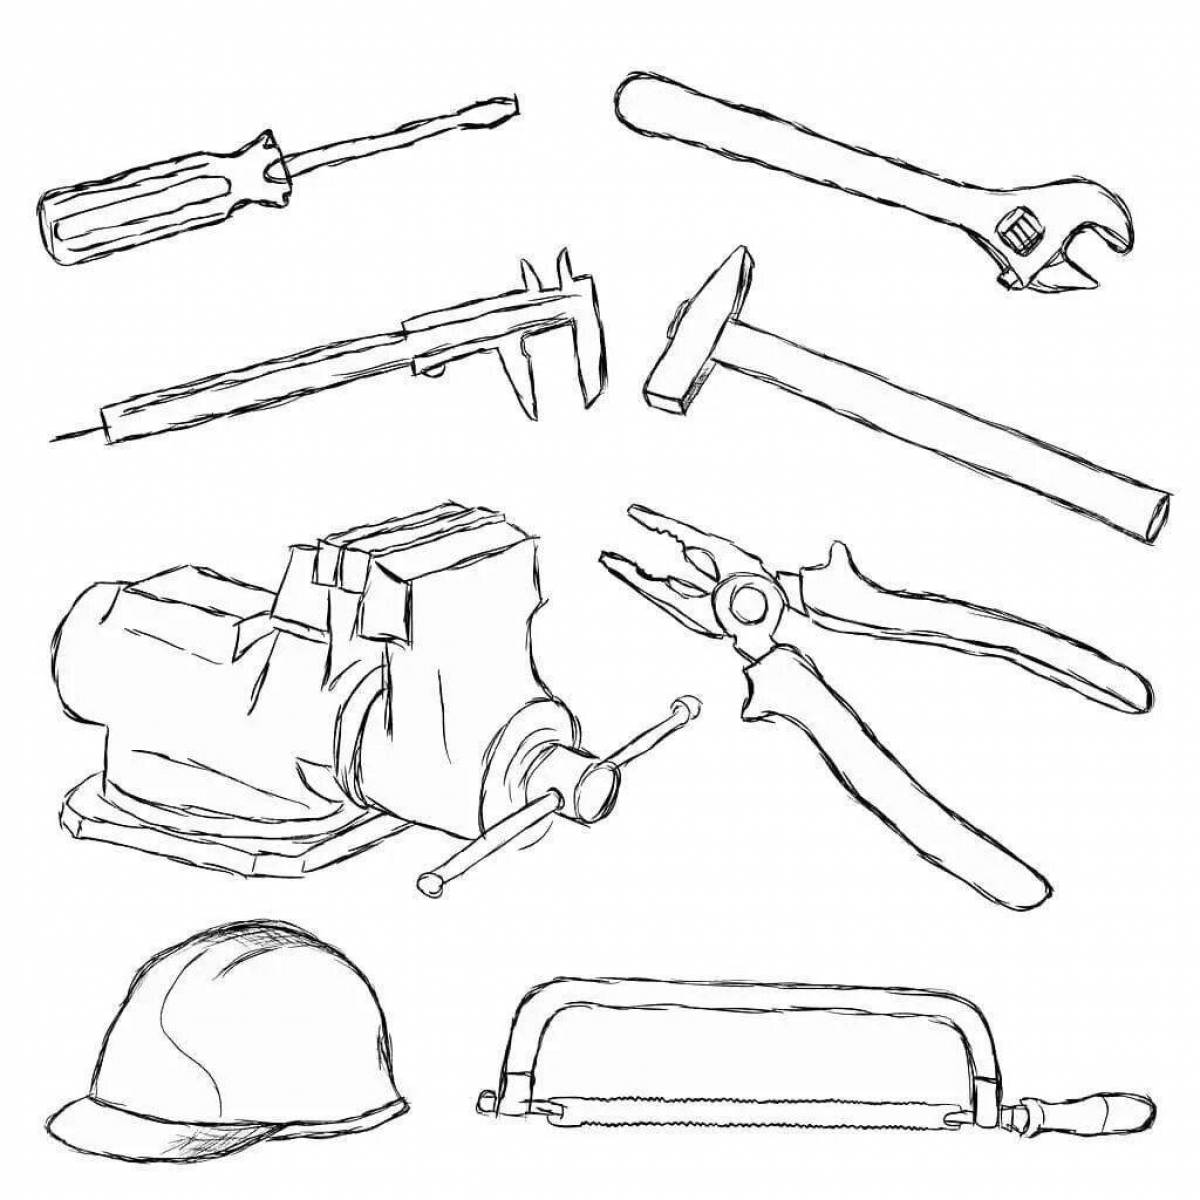 Color-lush tools coloring page